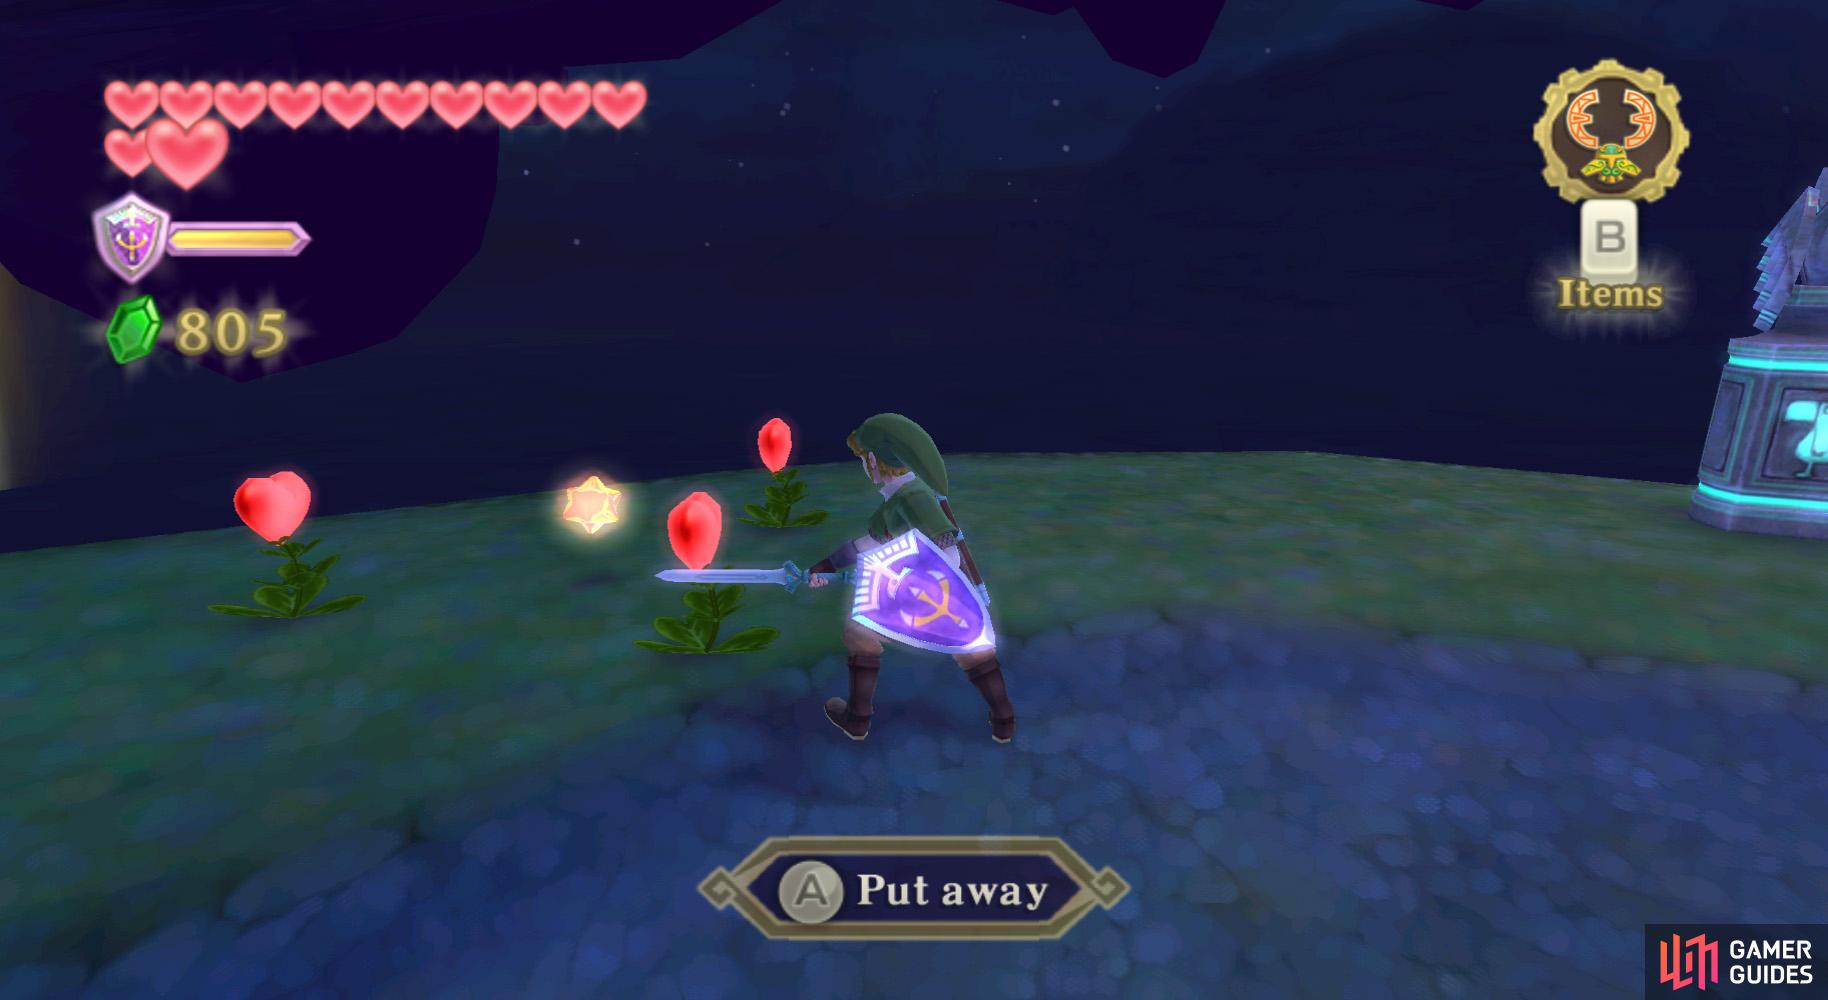 9: Go through the Waterfall cave and turn left towards the heart flowers.